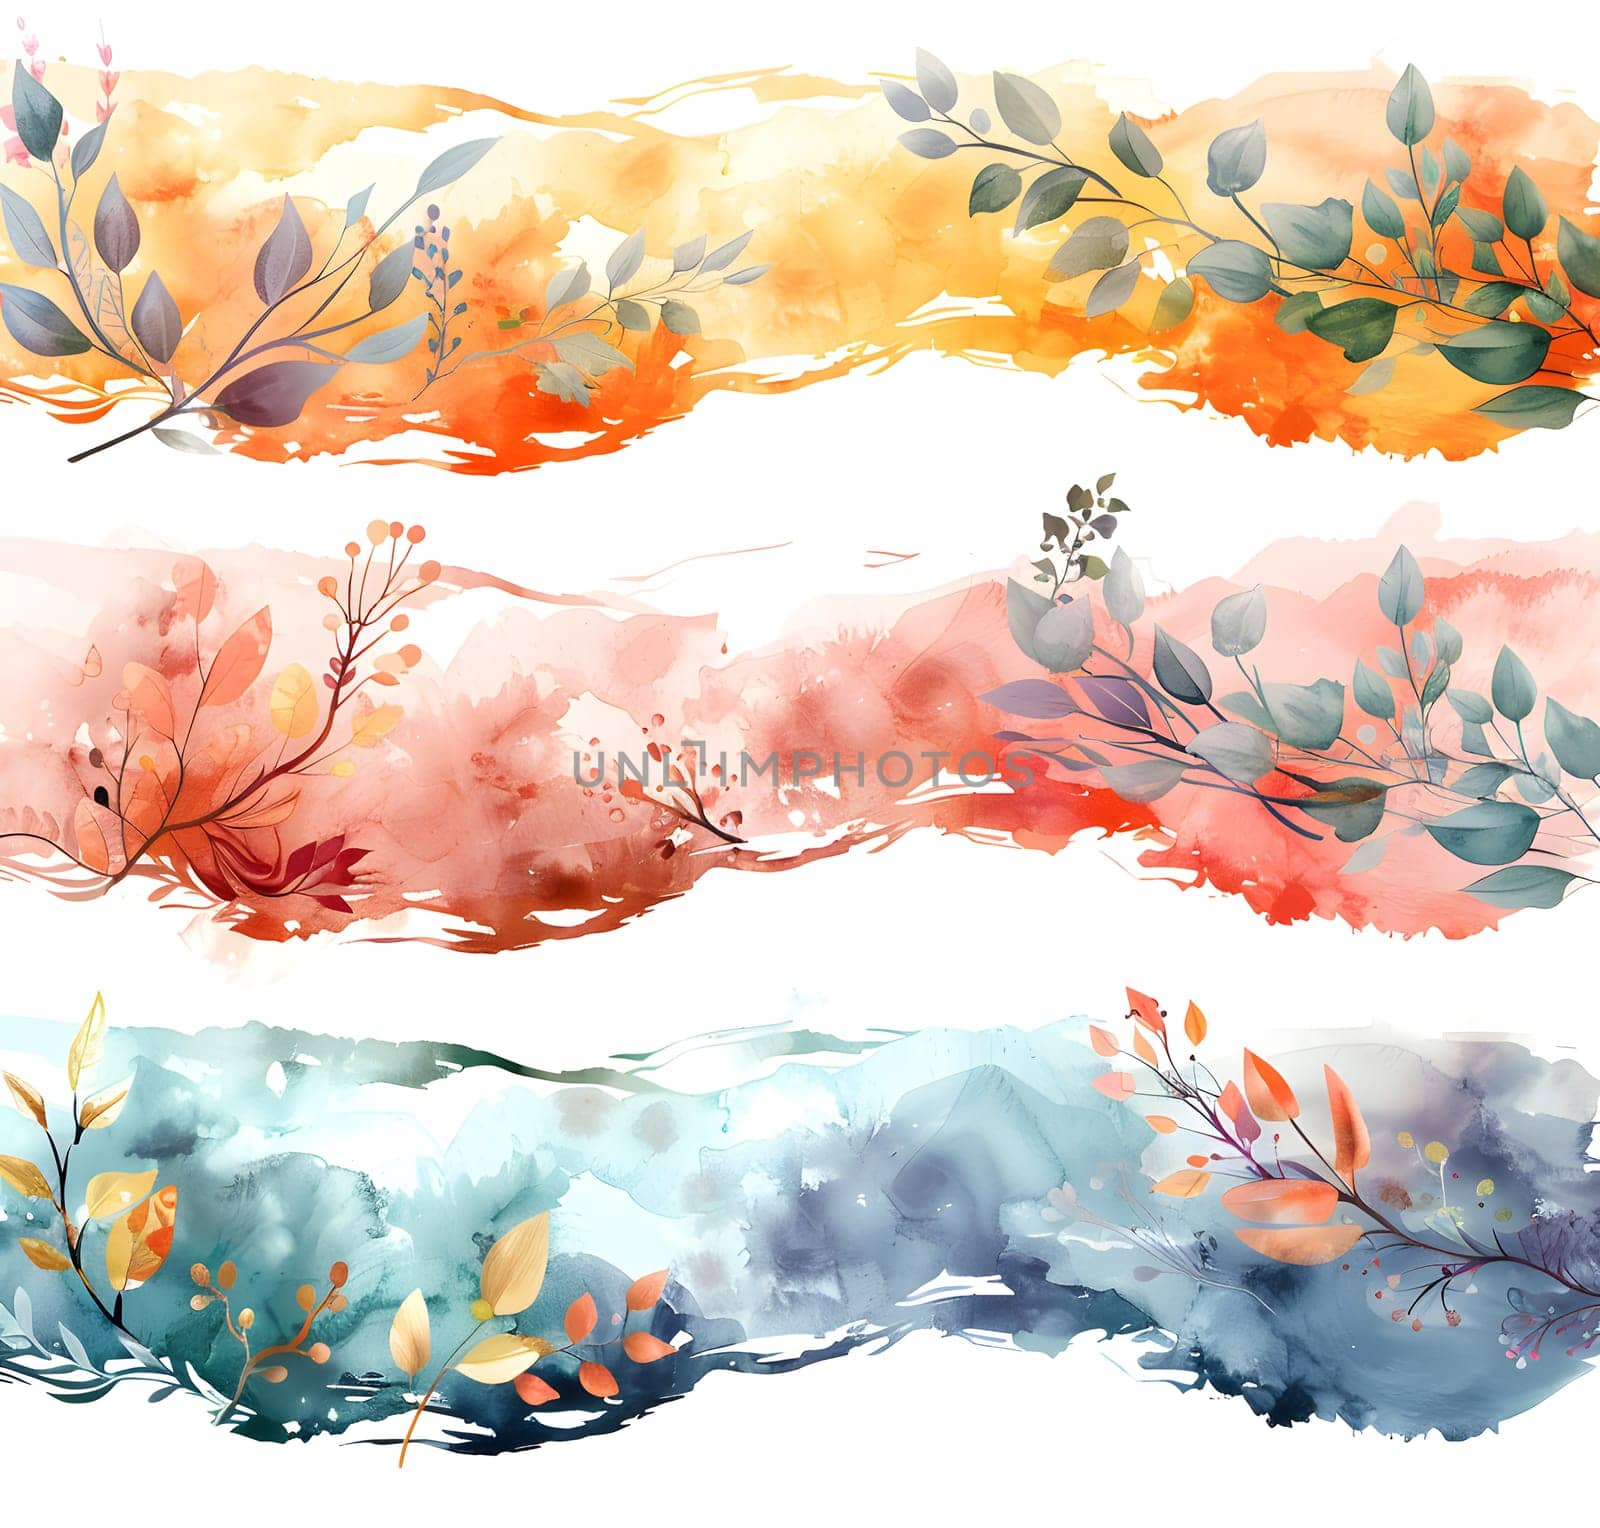 Artistic watercolor banners featuring vibrant orange flowers and leaves, showcasing the fluidity of nature through liquid paint. A harmonious blend of colors in a natural landscape pattern